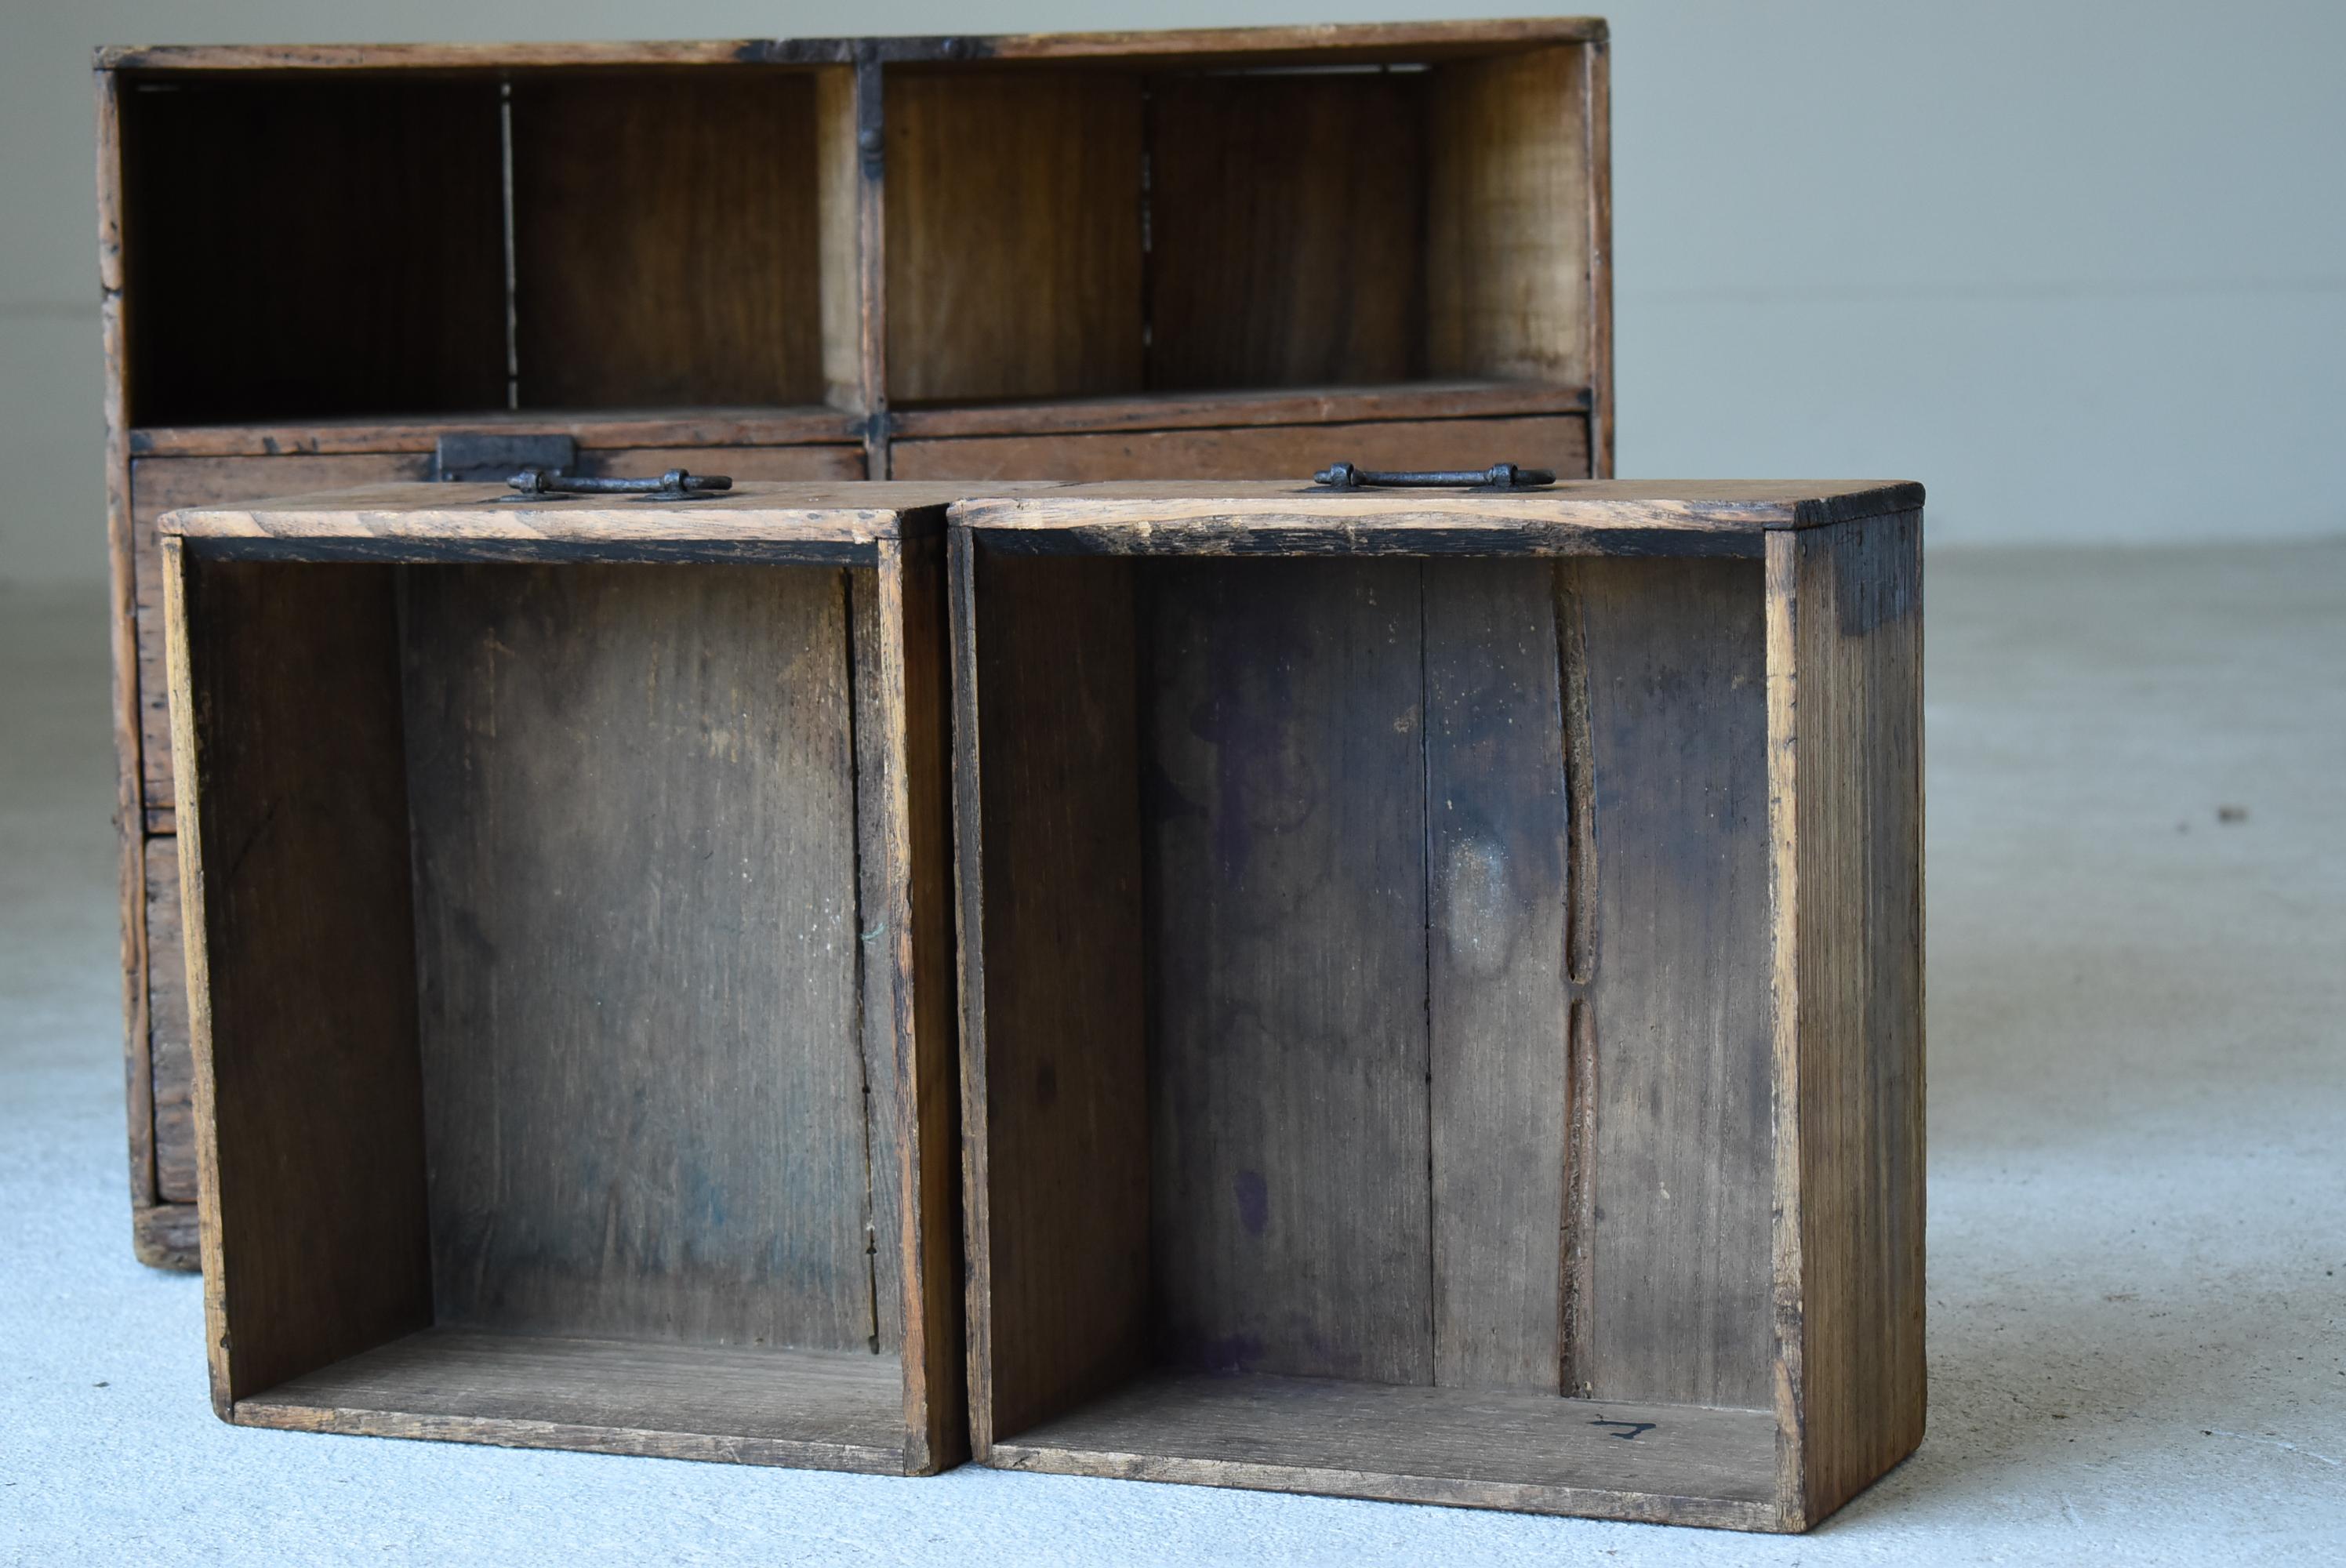 Japanese Antique Chests of Drawers 1860s-1900s /Tansu Storage Mingei Cabinet 2